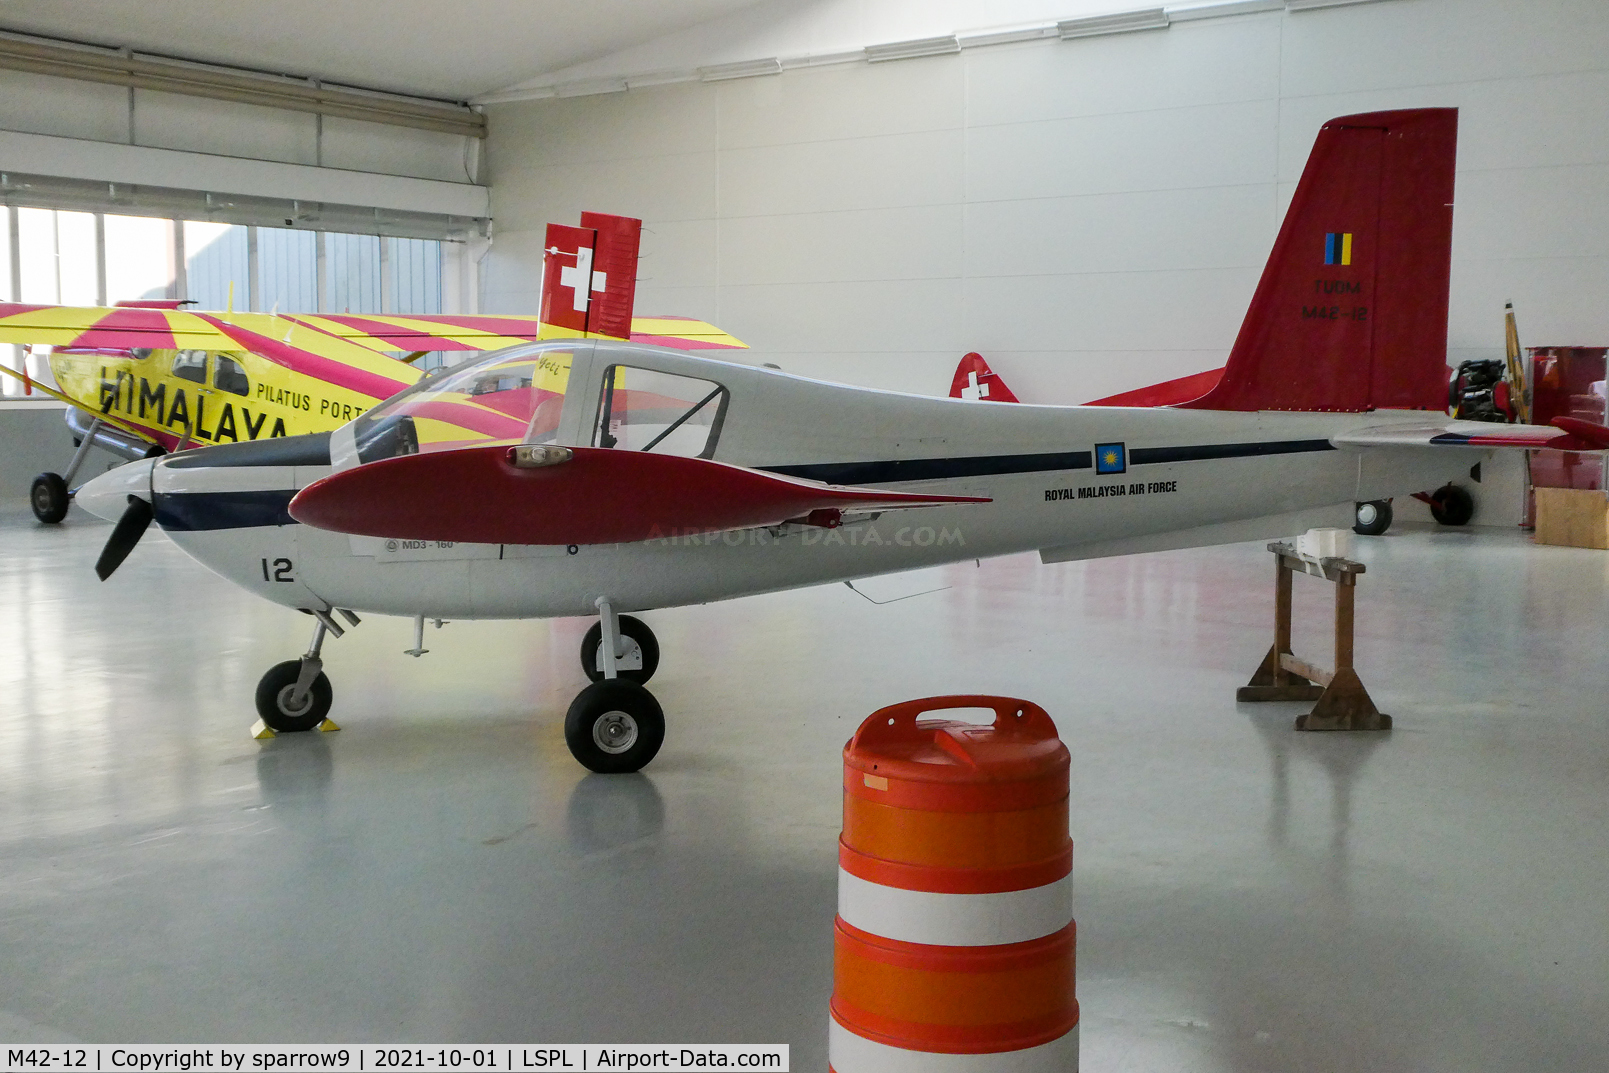 M42-12, SME Aviation MD3-160 C/N 019, Back at its birth-place: this aircraft was developped at Langenthal-Bleienbach by Max Daetwyler, MD3-160 Swiss Trainer